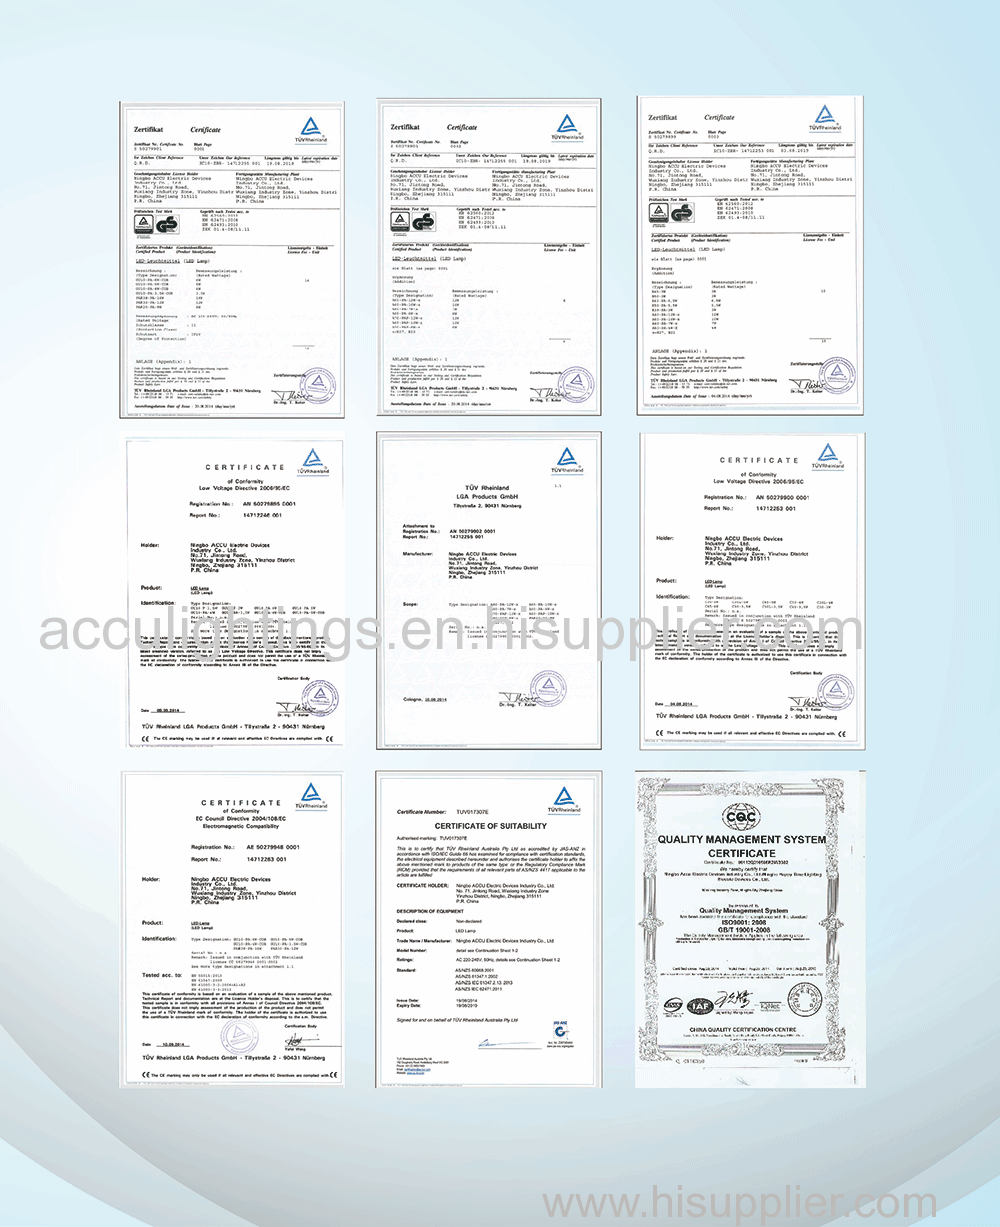 Products relative certificates